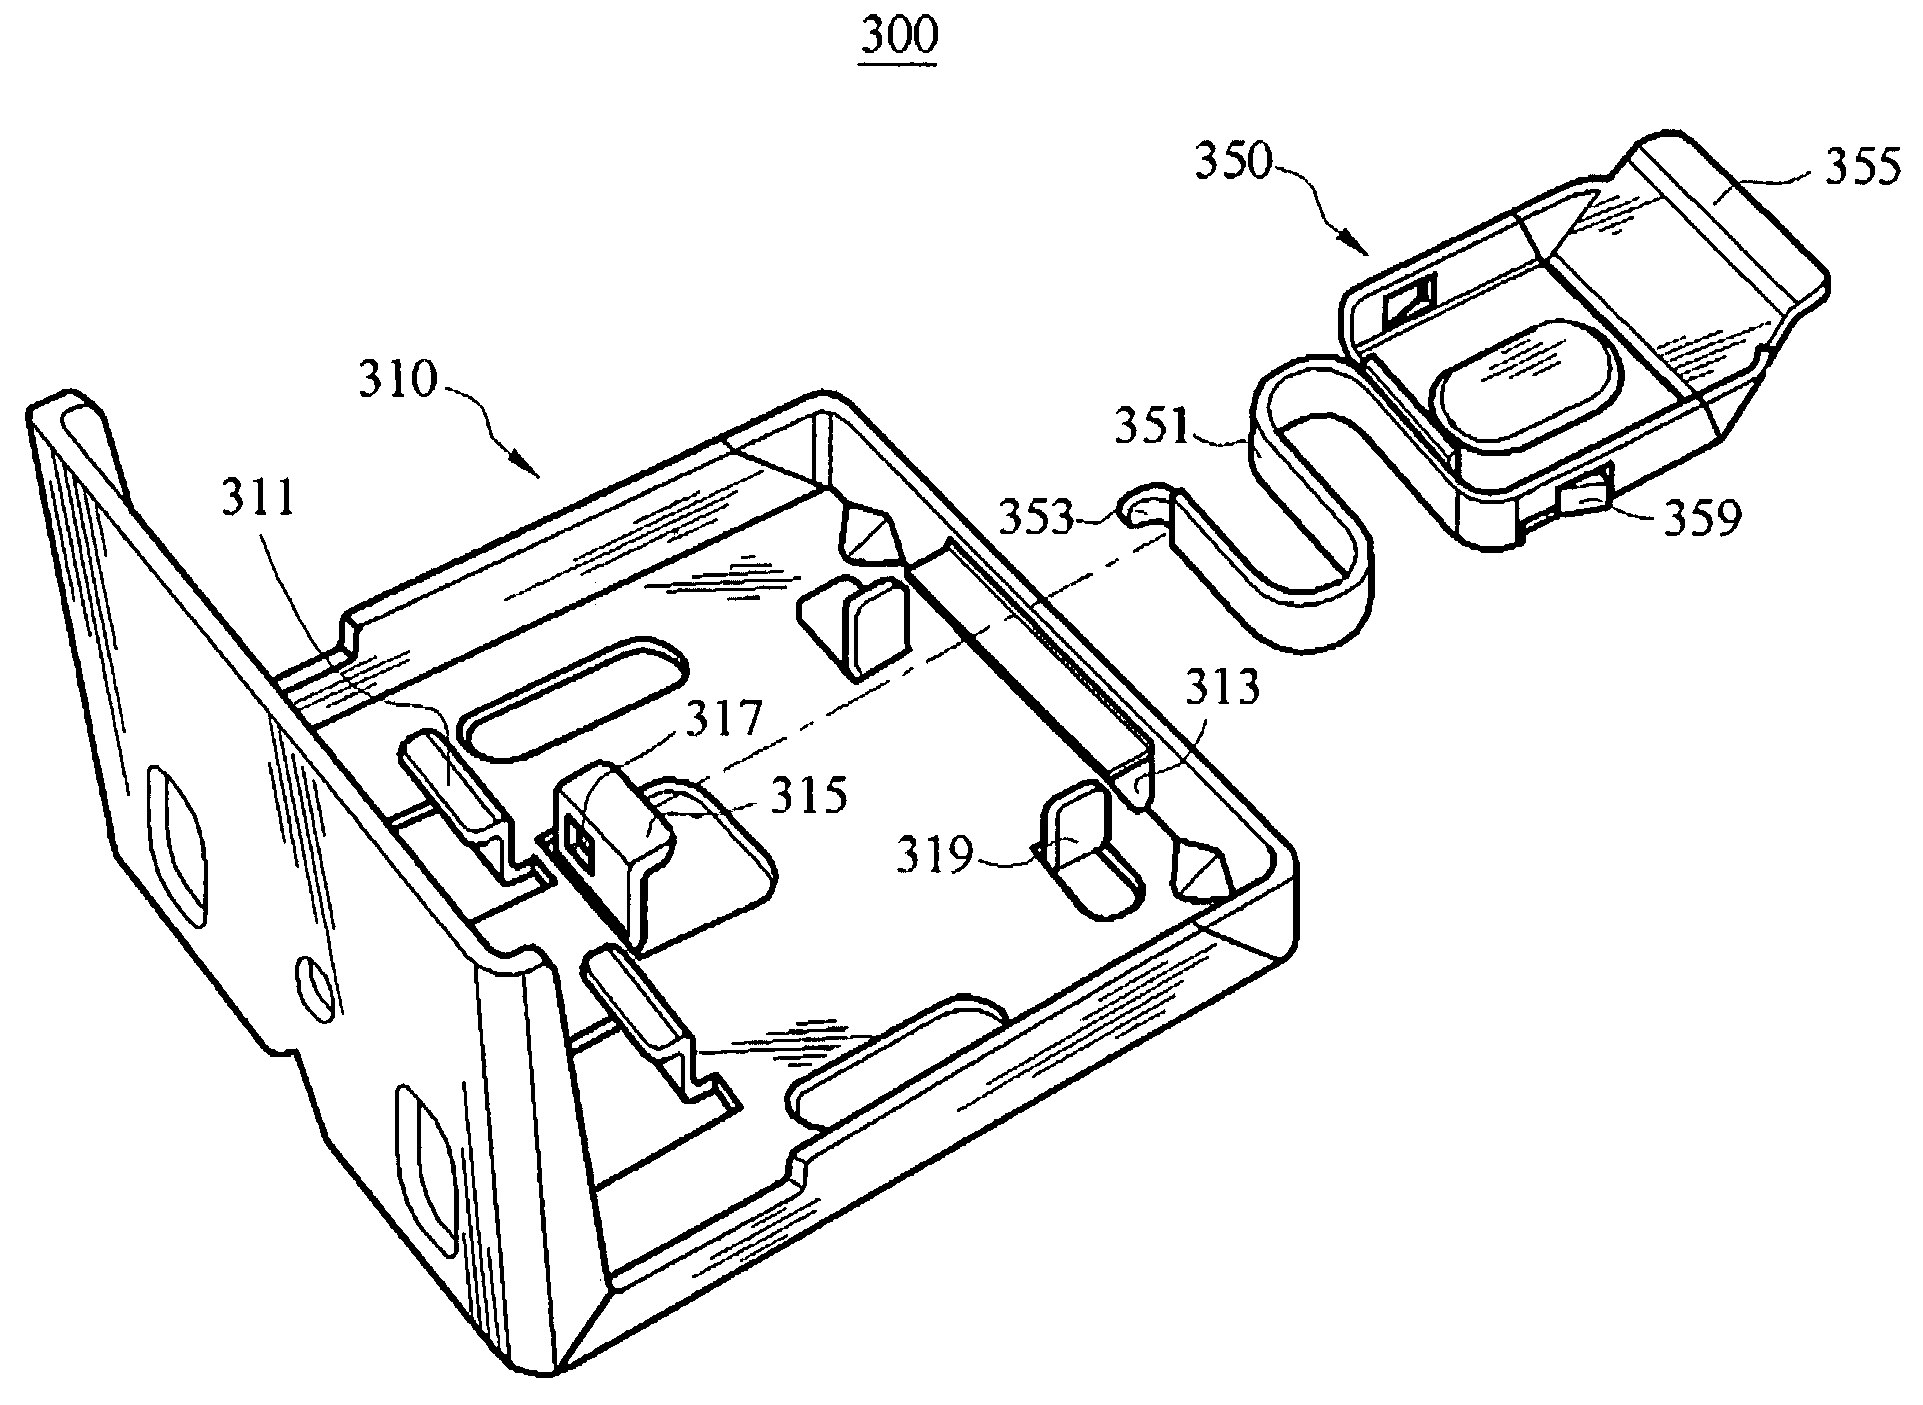 Bracket and head rail assembly